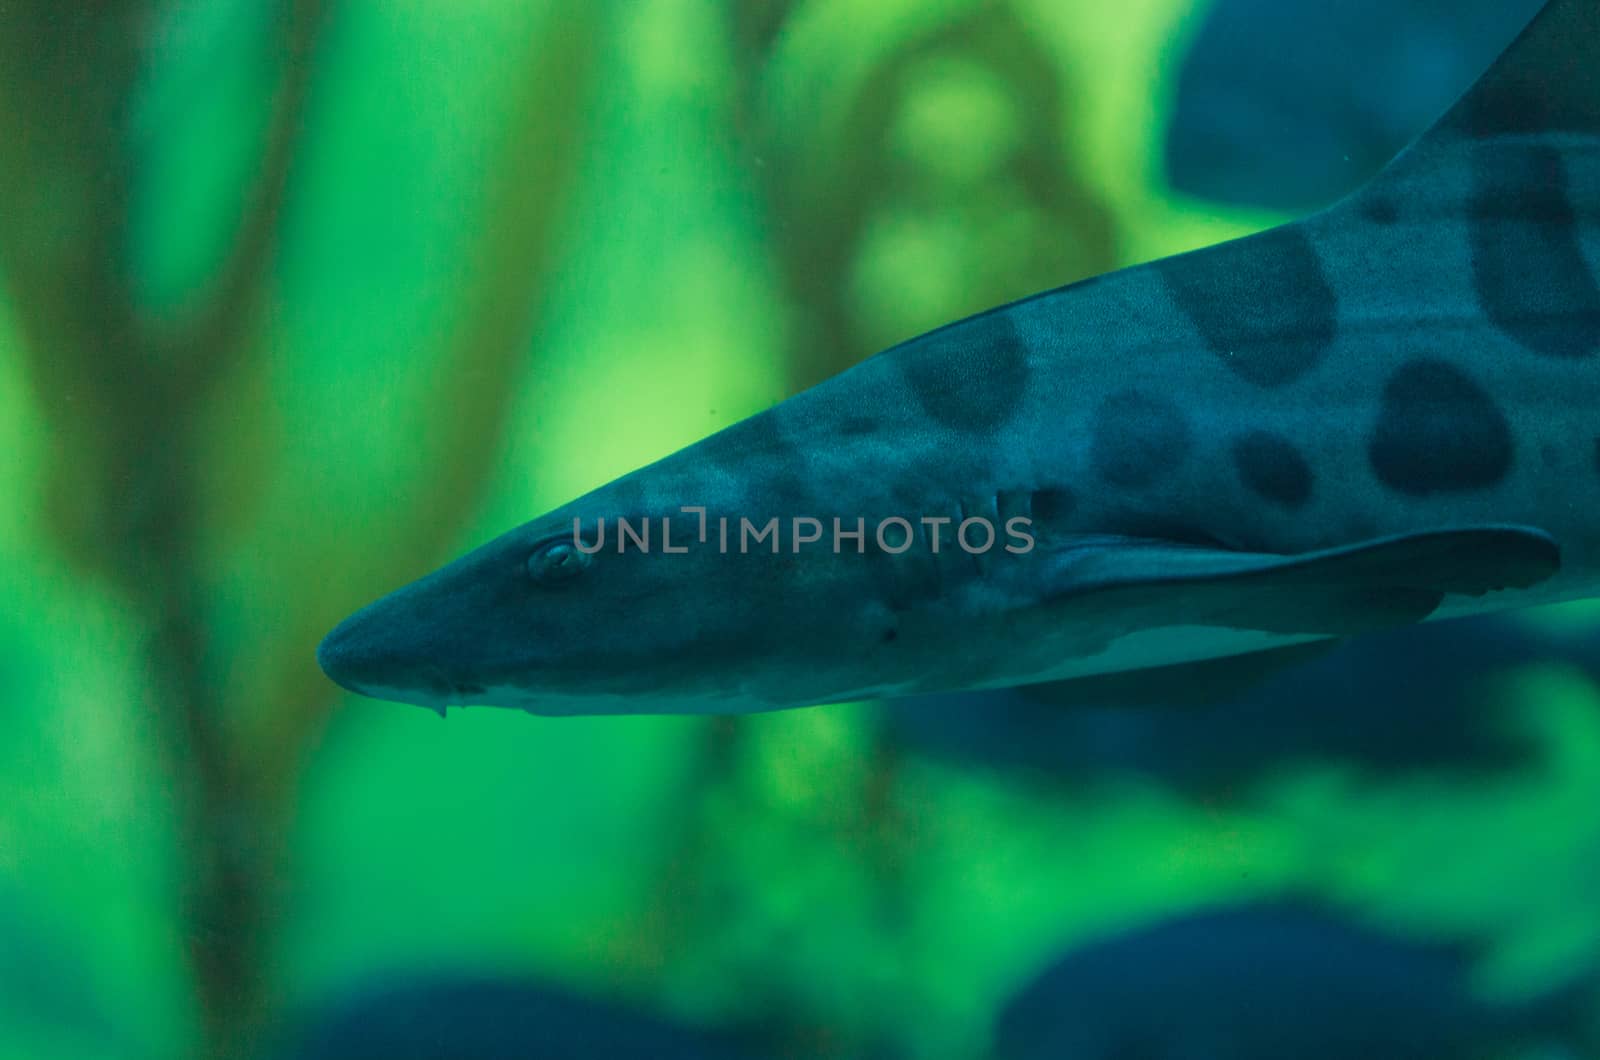 Zebra shark, Stegostoma fasciatum, also called the leopard shark, is a species of carpet shark and is found throughout the tropical Indo-Pacific.